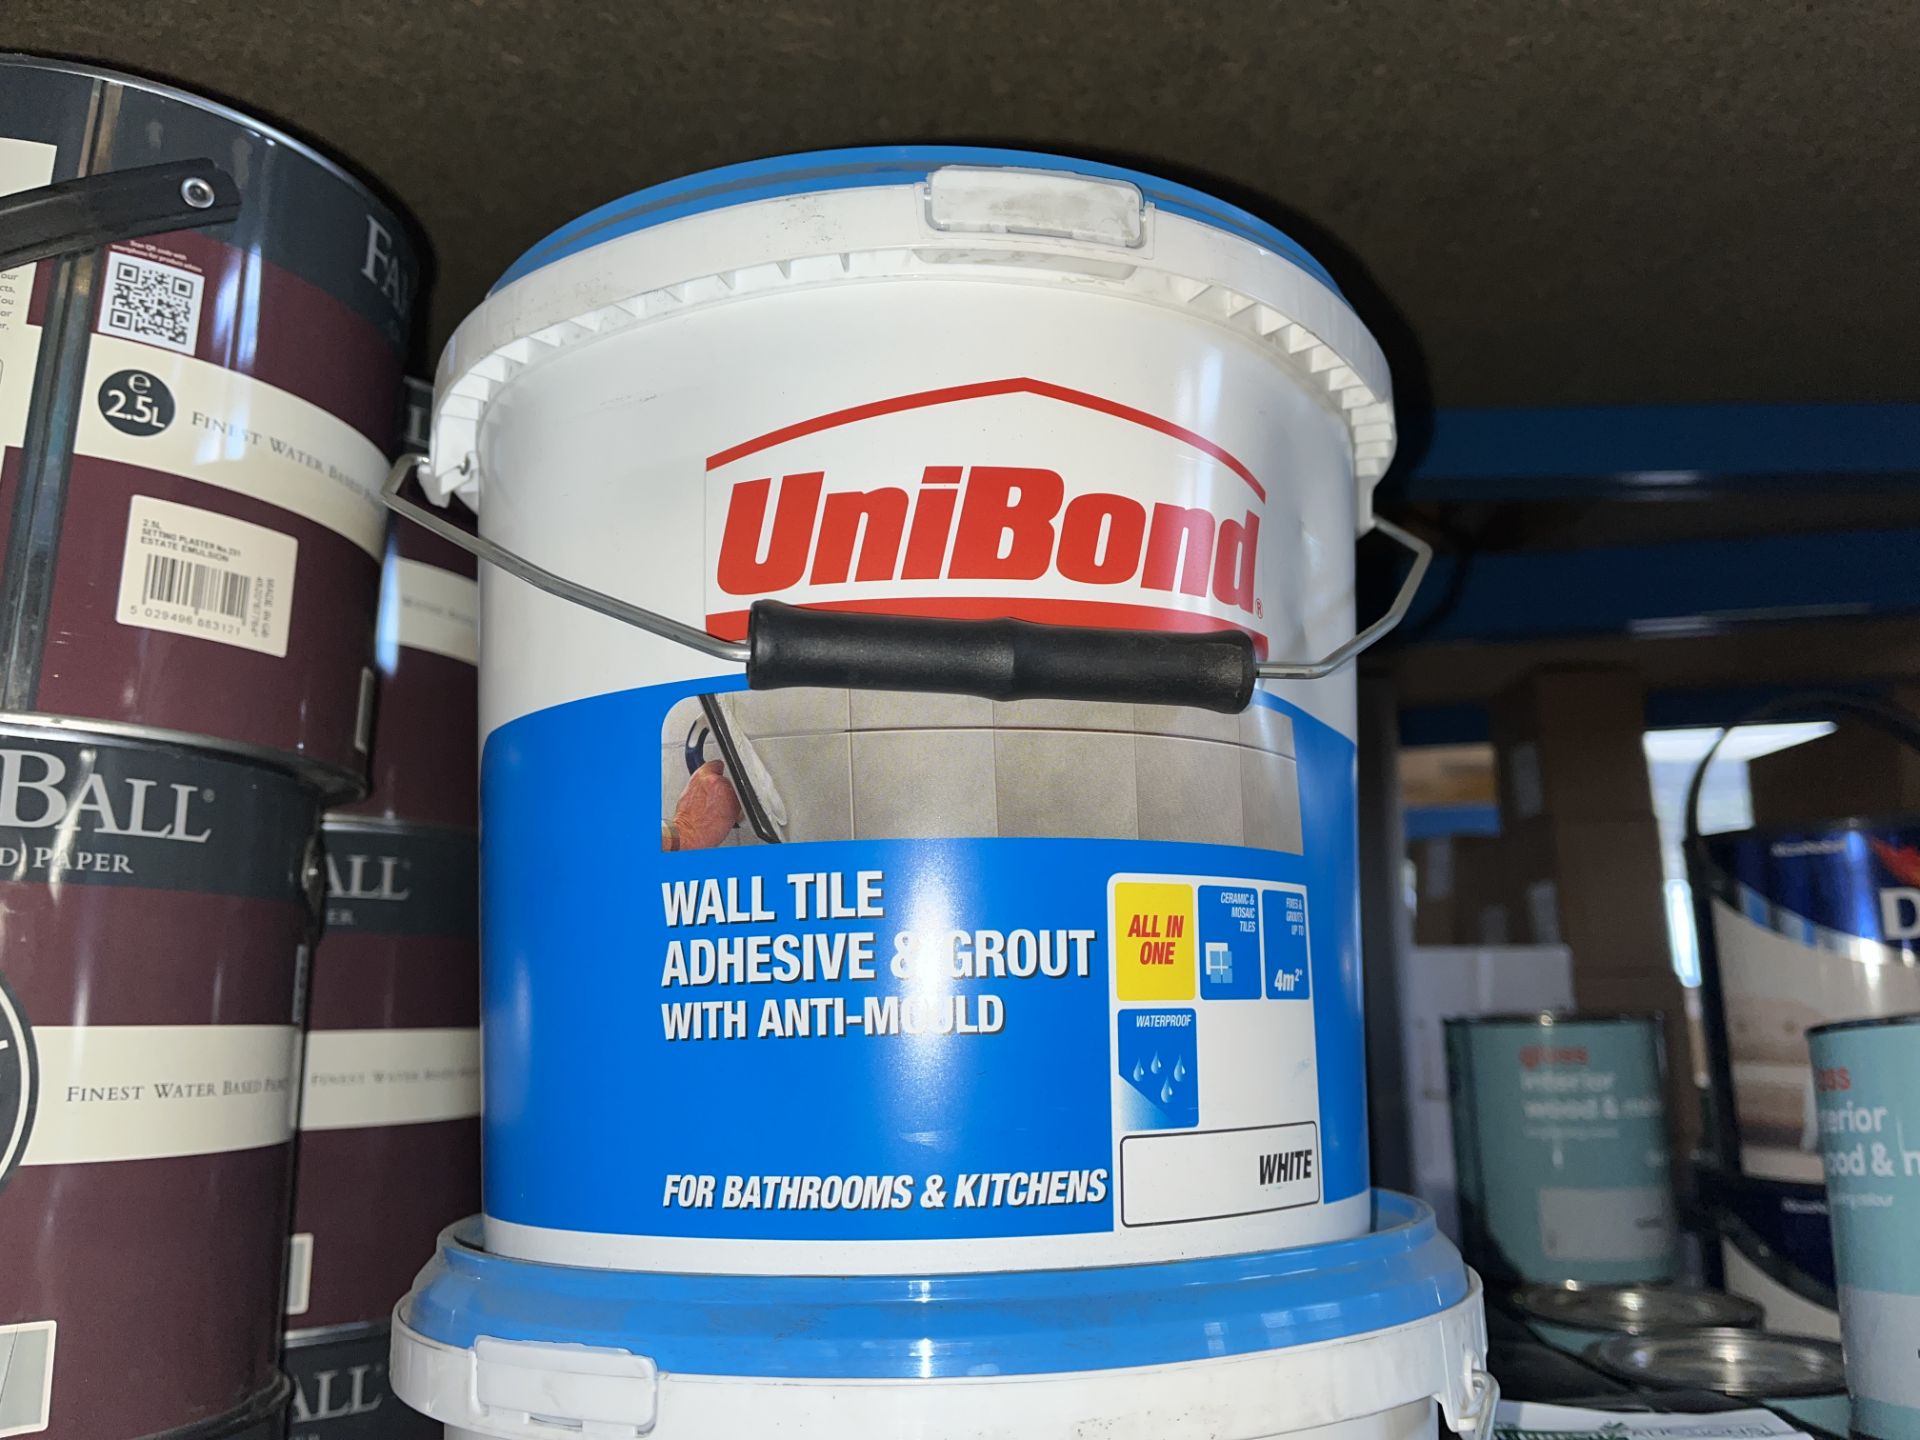 6 X BRAND NEW UNIBOND READY MIXED WHITE TILE ADHESIVE AND GROUT 6.4KG S1-7